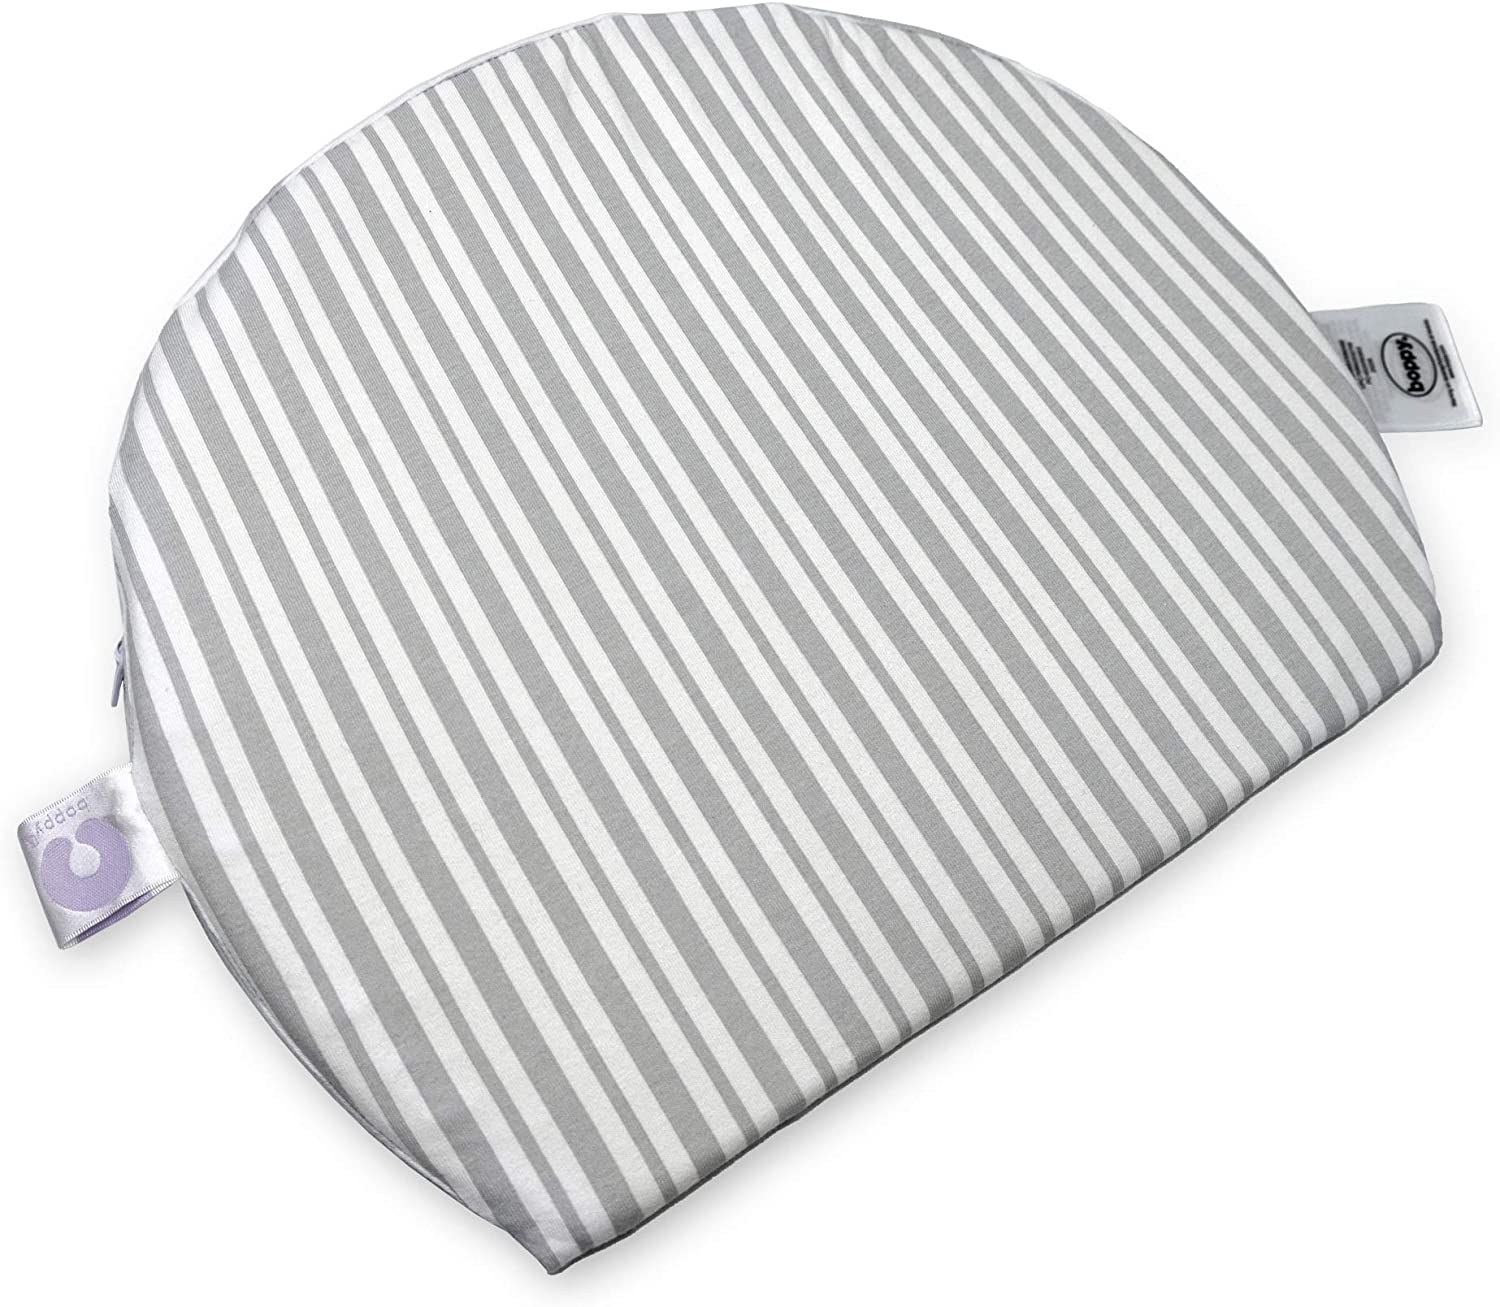 Boppy Pregnancy Wedge Pillow with Removable Cover For New Mom